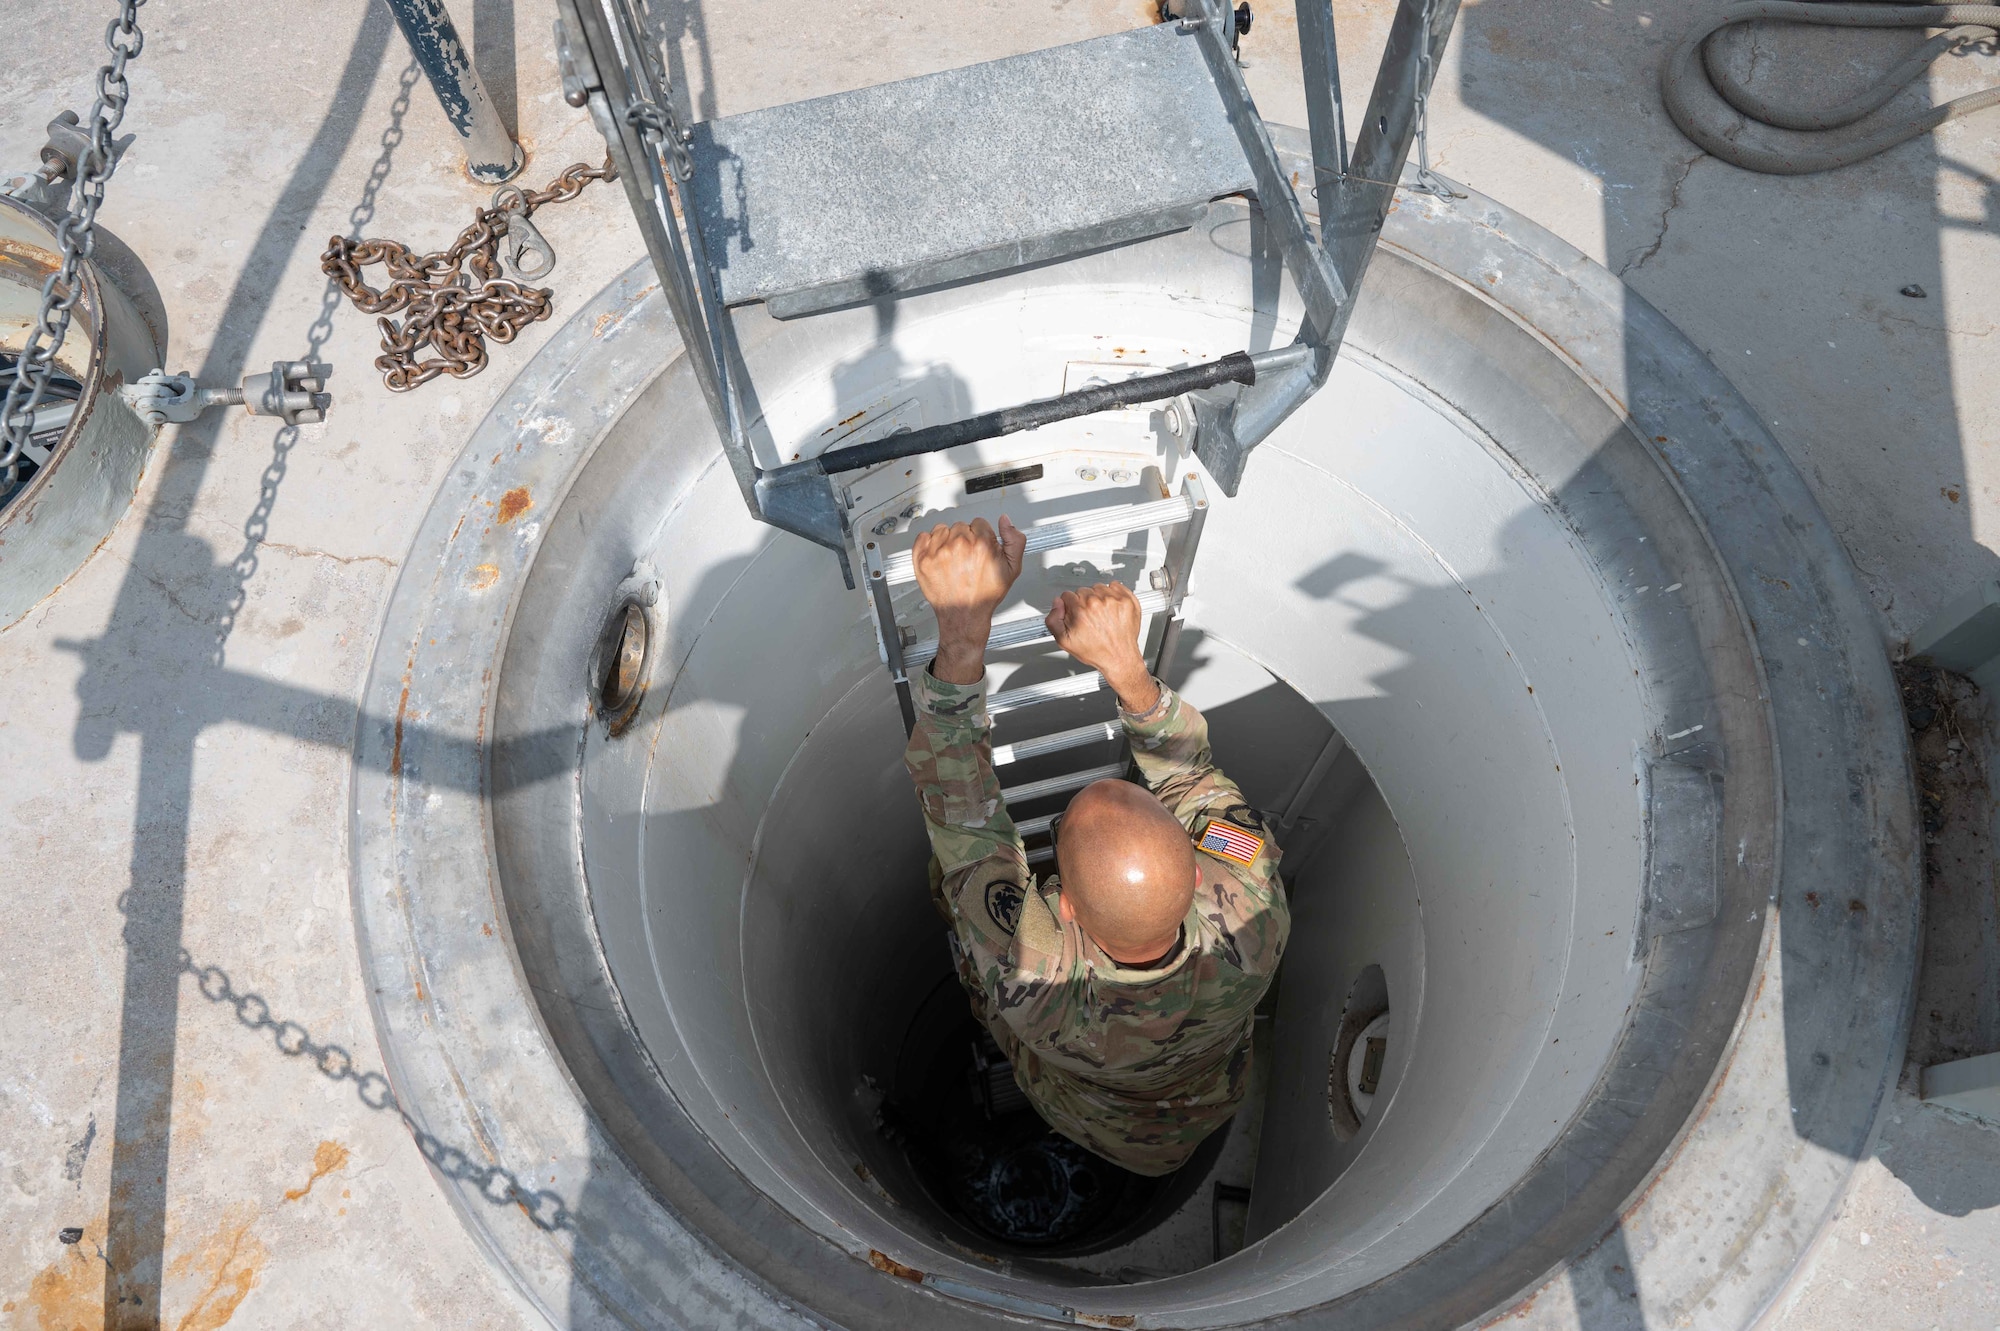 U.S. Army Lt. Gen. A.C. Roper, deputy commander of U.S. Northern Command, climbs down the ladder of the Bravo-02 launch facility near La Grange, Wyoming, June 13, 2023. Roper visited the 90th Missile Wing to gain a hands-on perspective of how the intercontinental ballistic missile mission supports homeland defense. (U.S. Air Force photo by Senior Airman Sarah Post)